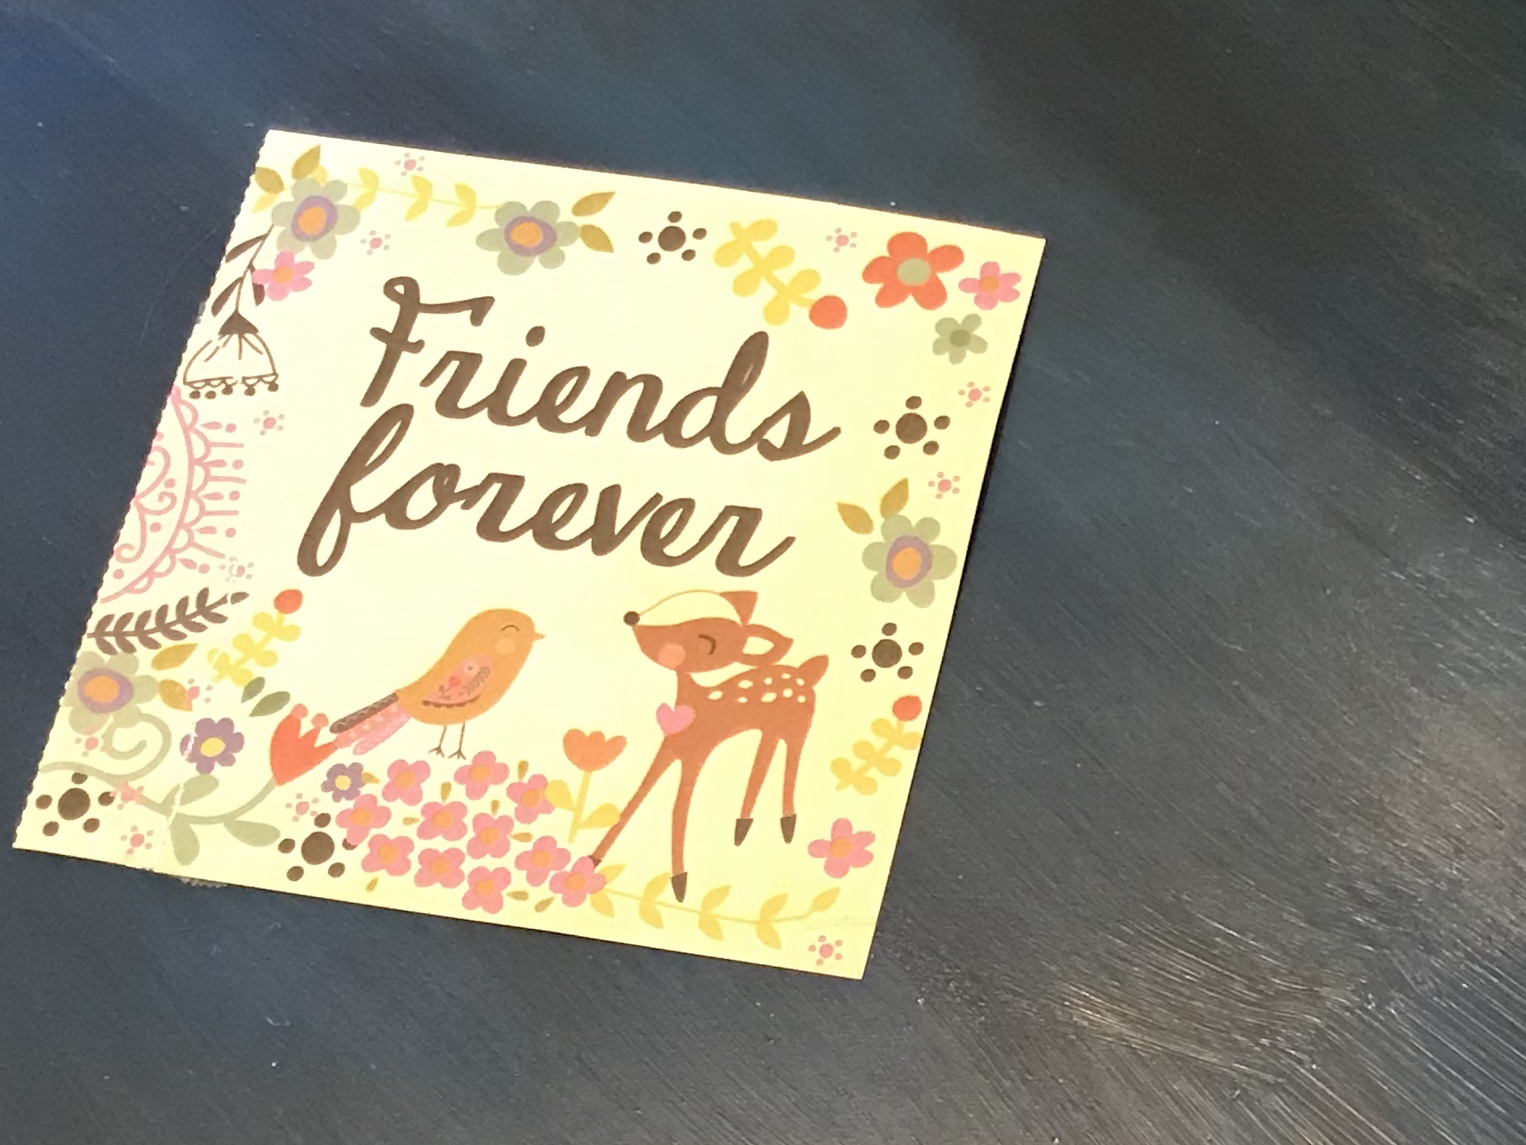 Friendship Card Quotes to Put A Smile on Someone's Face